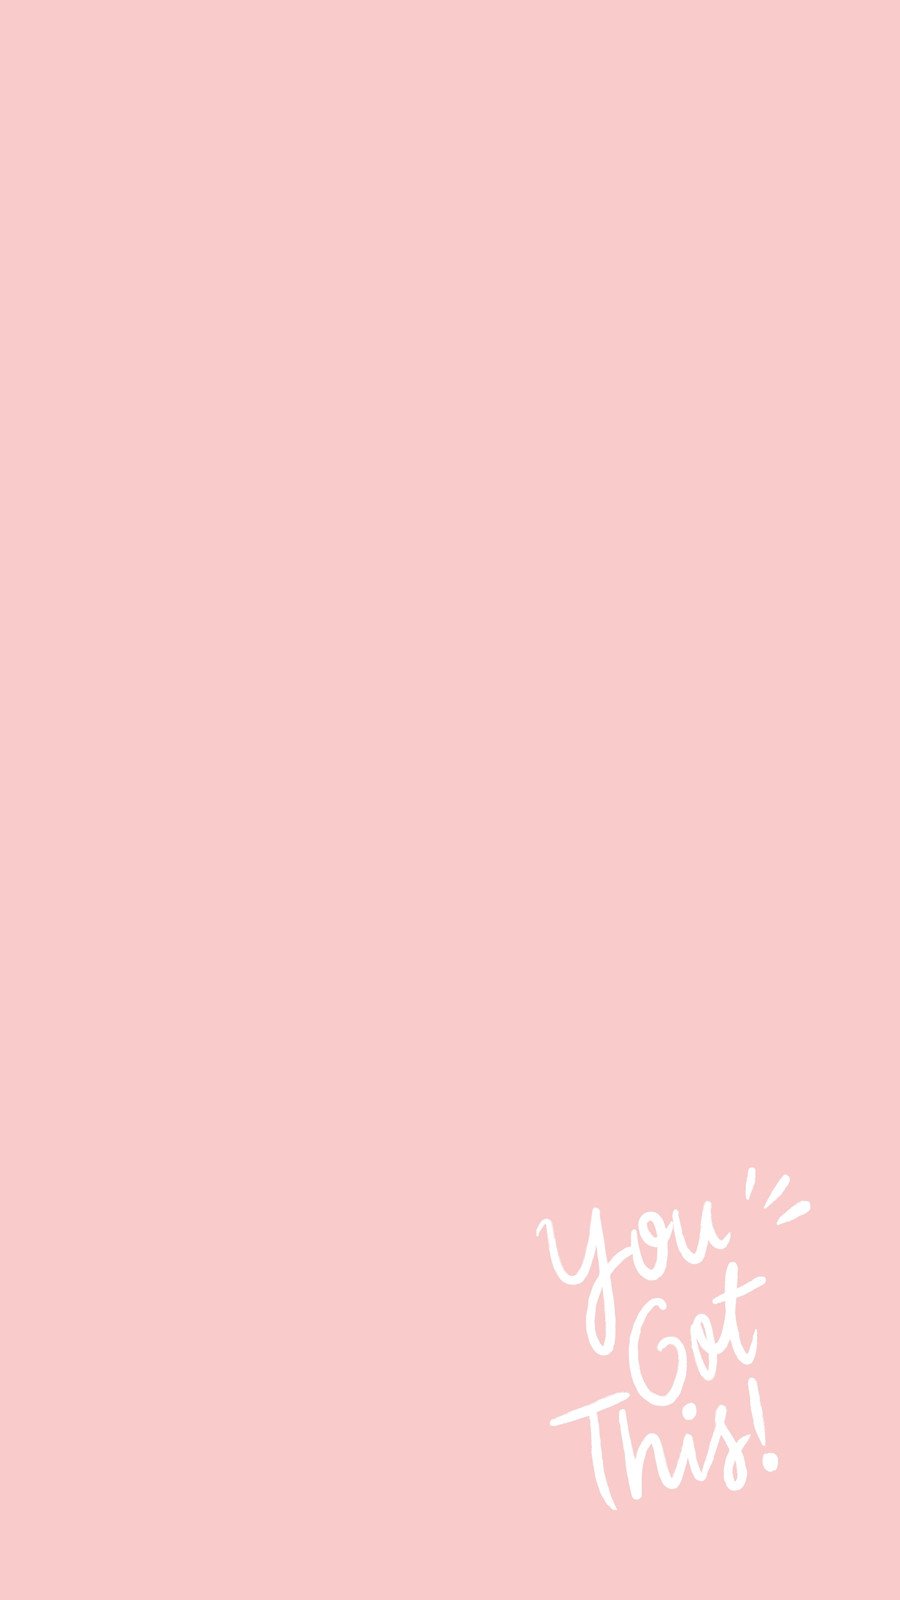 Soft Pink Feather Background Wallpaper Image For Free Download